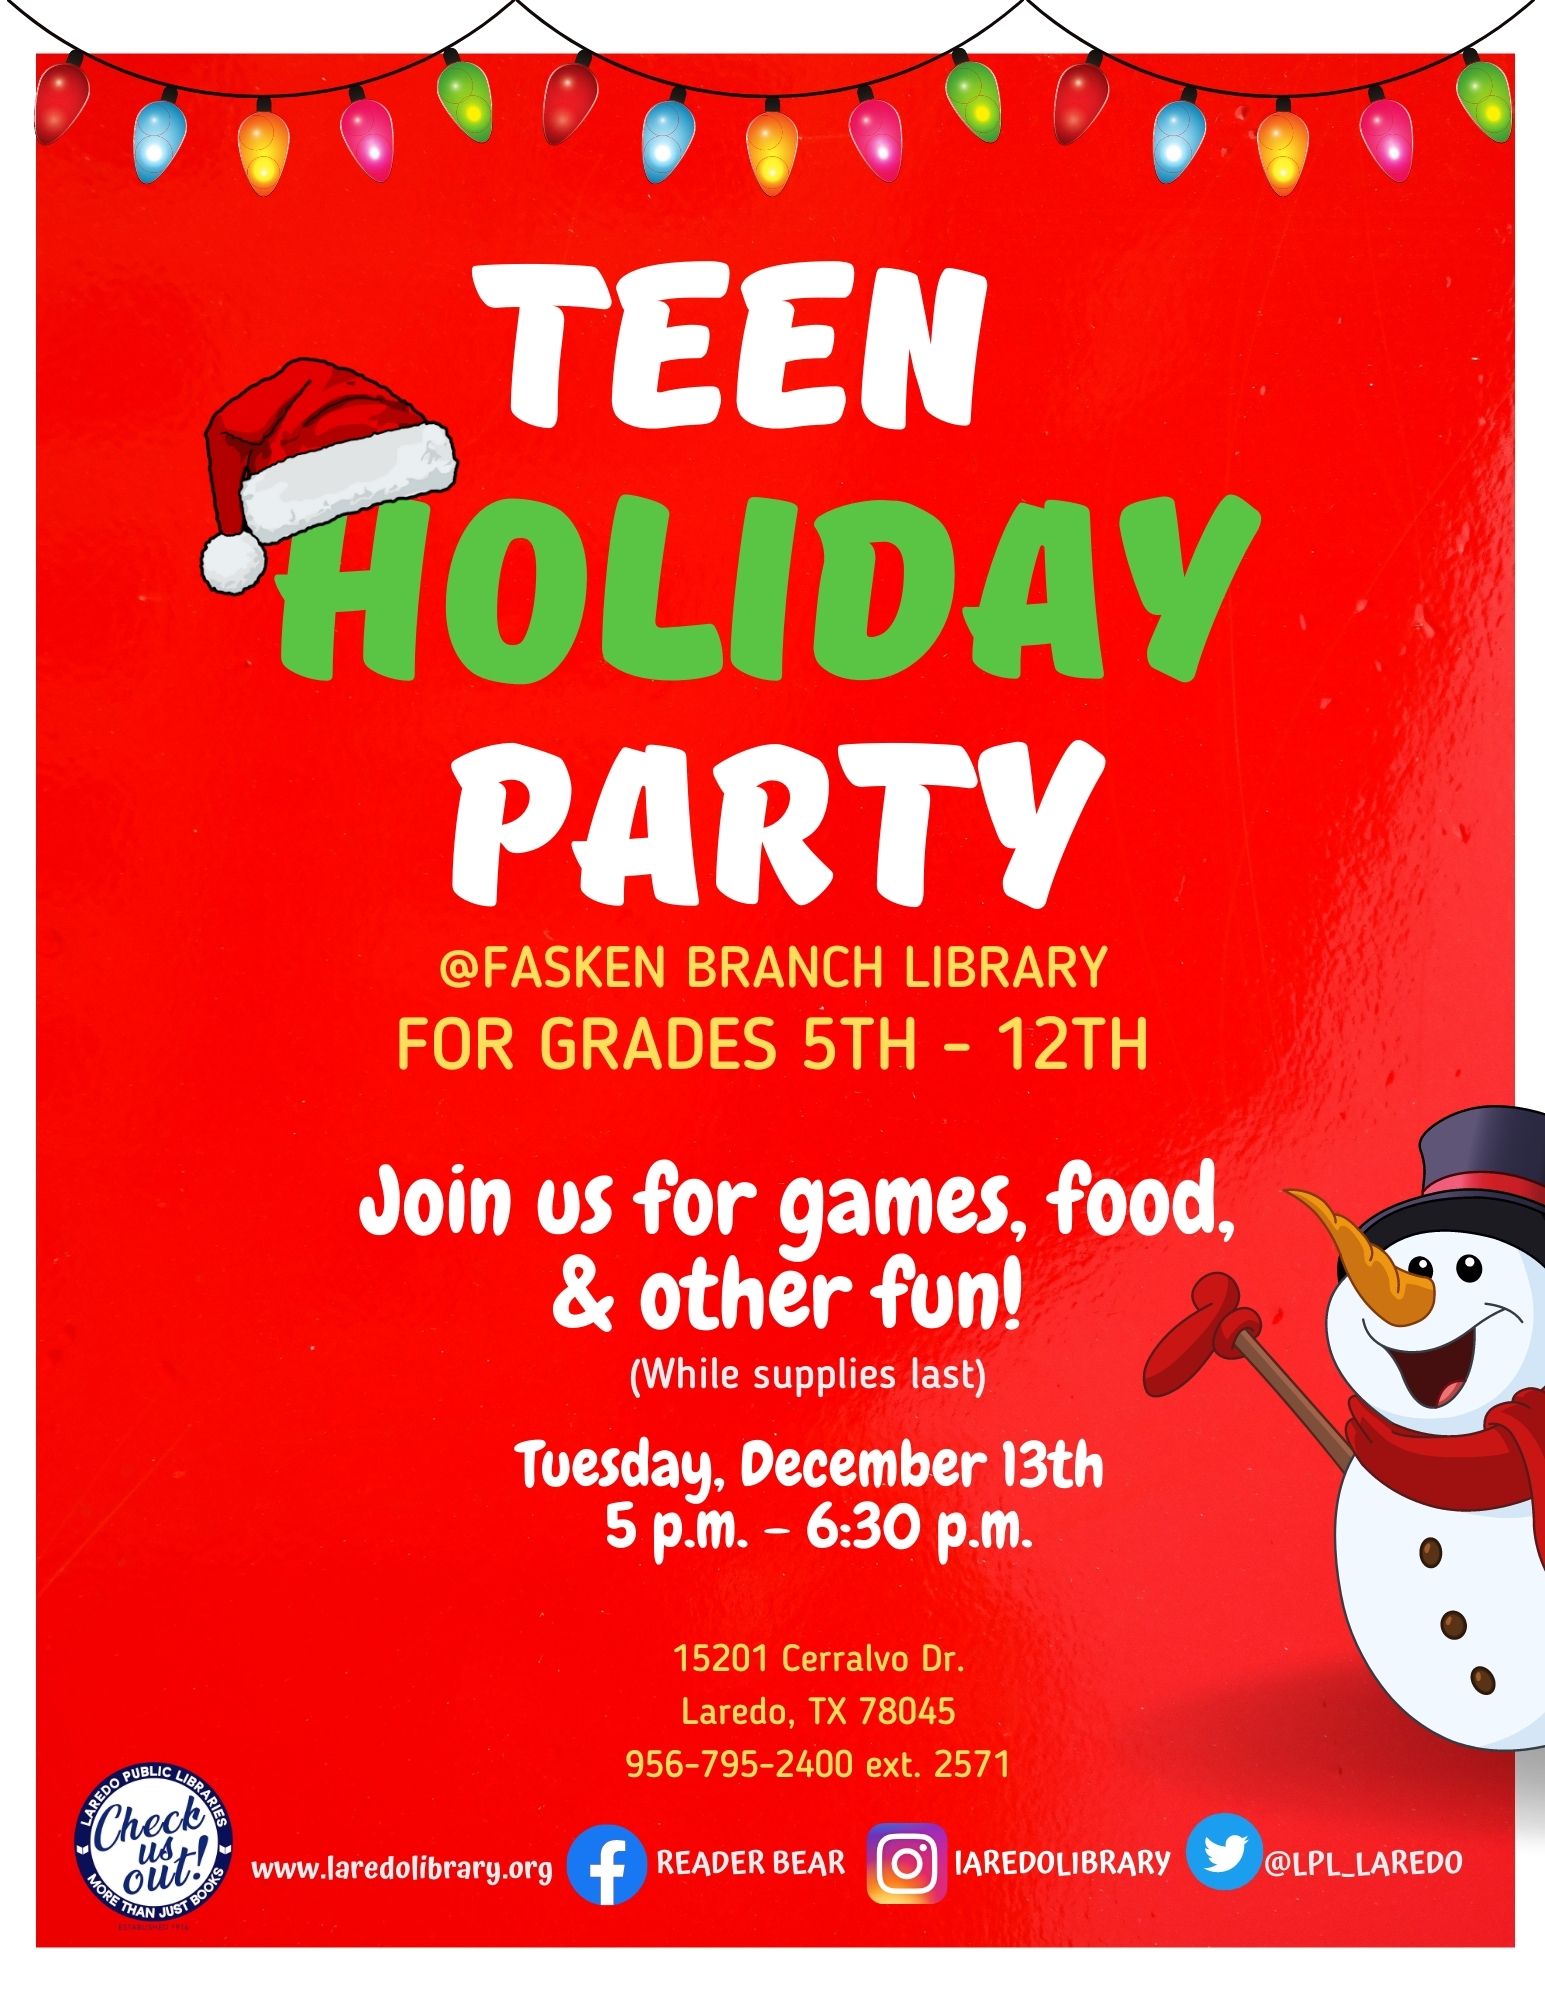 Teen Holiday Party!